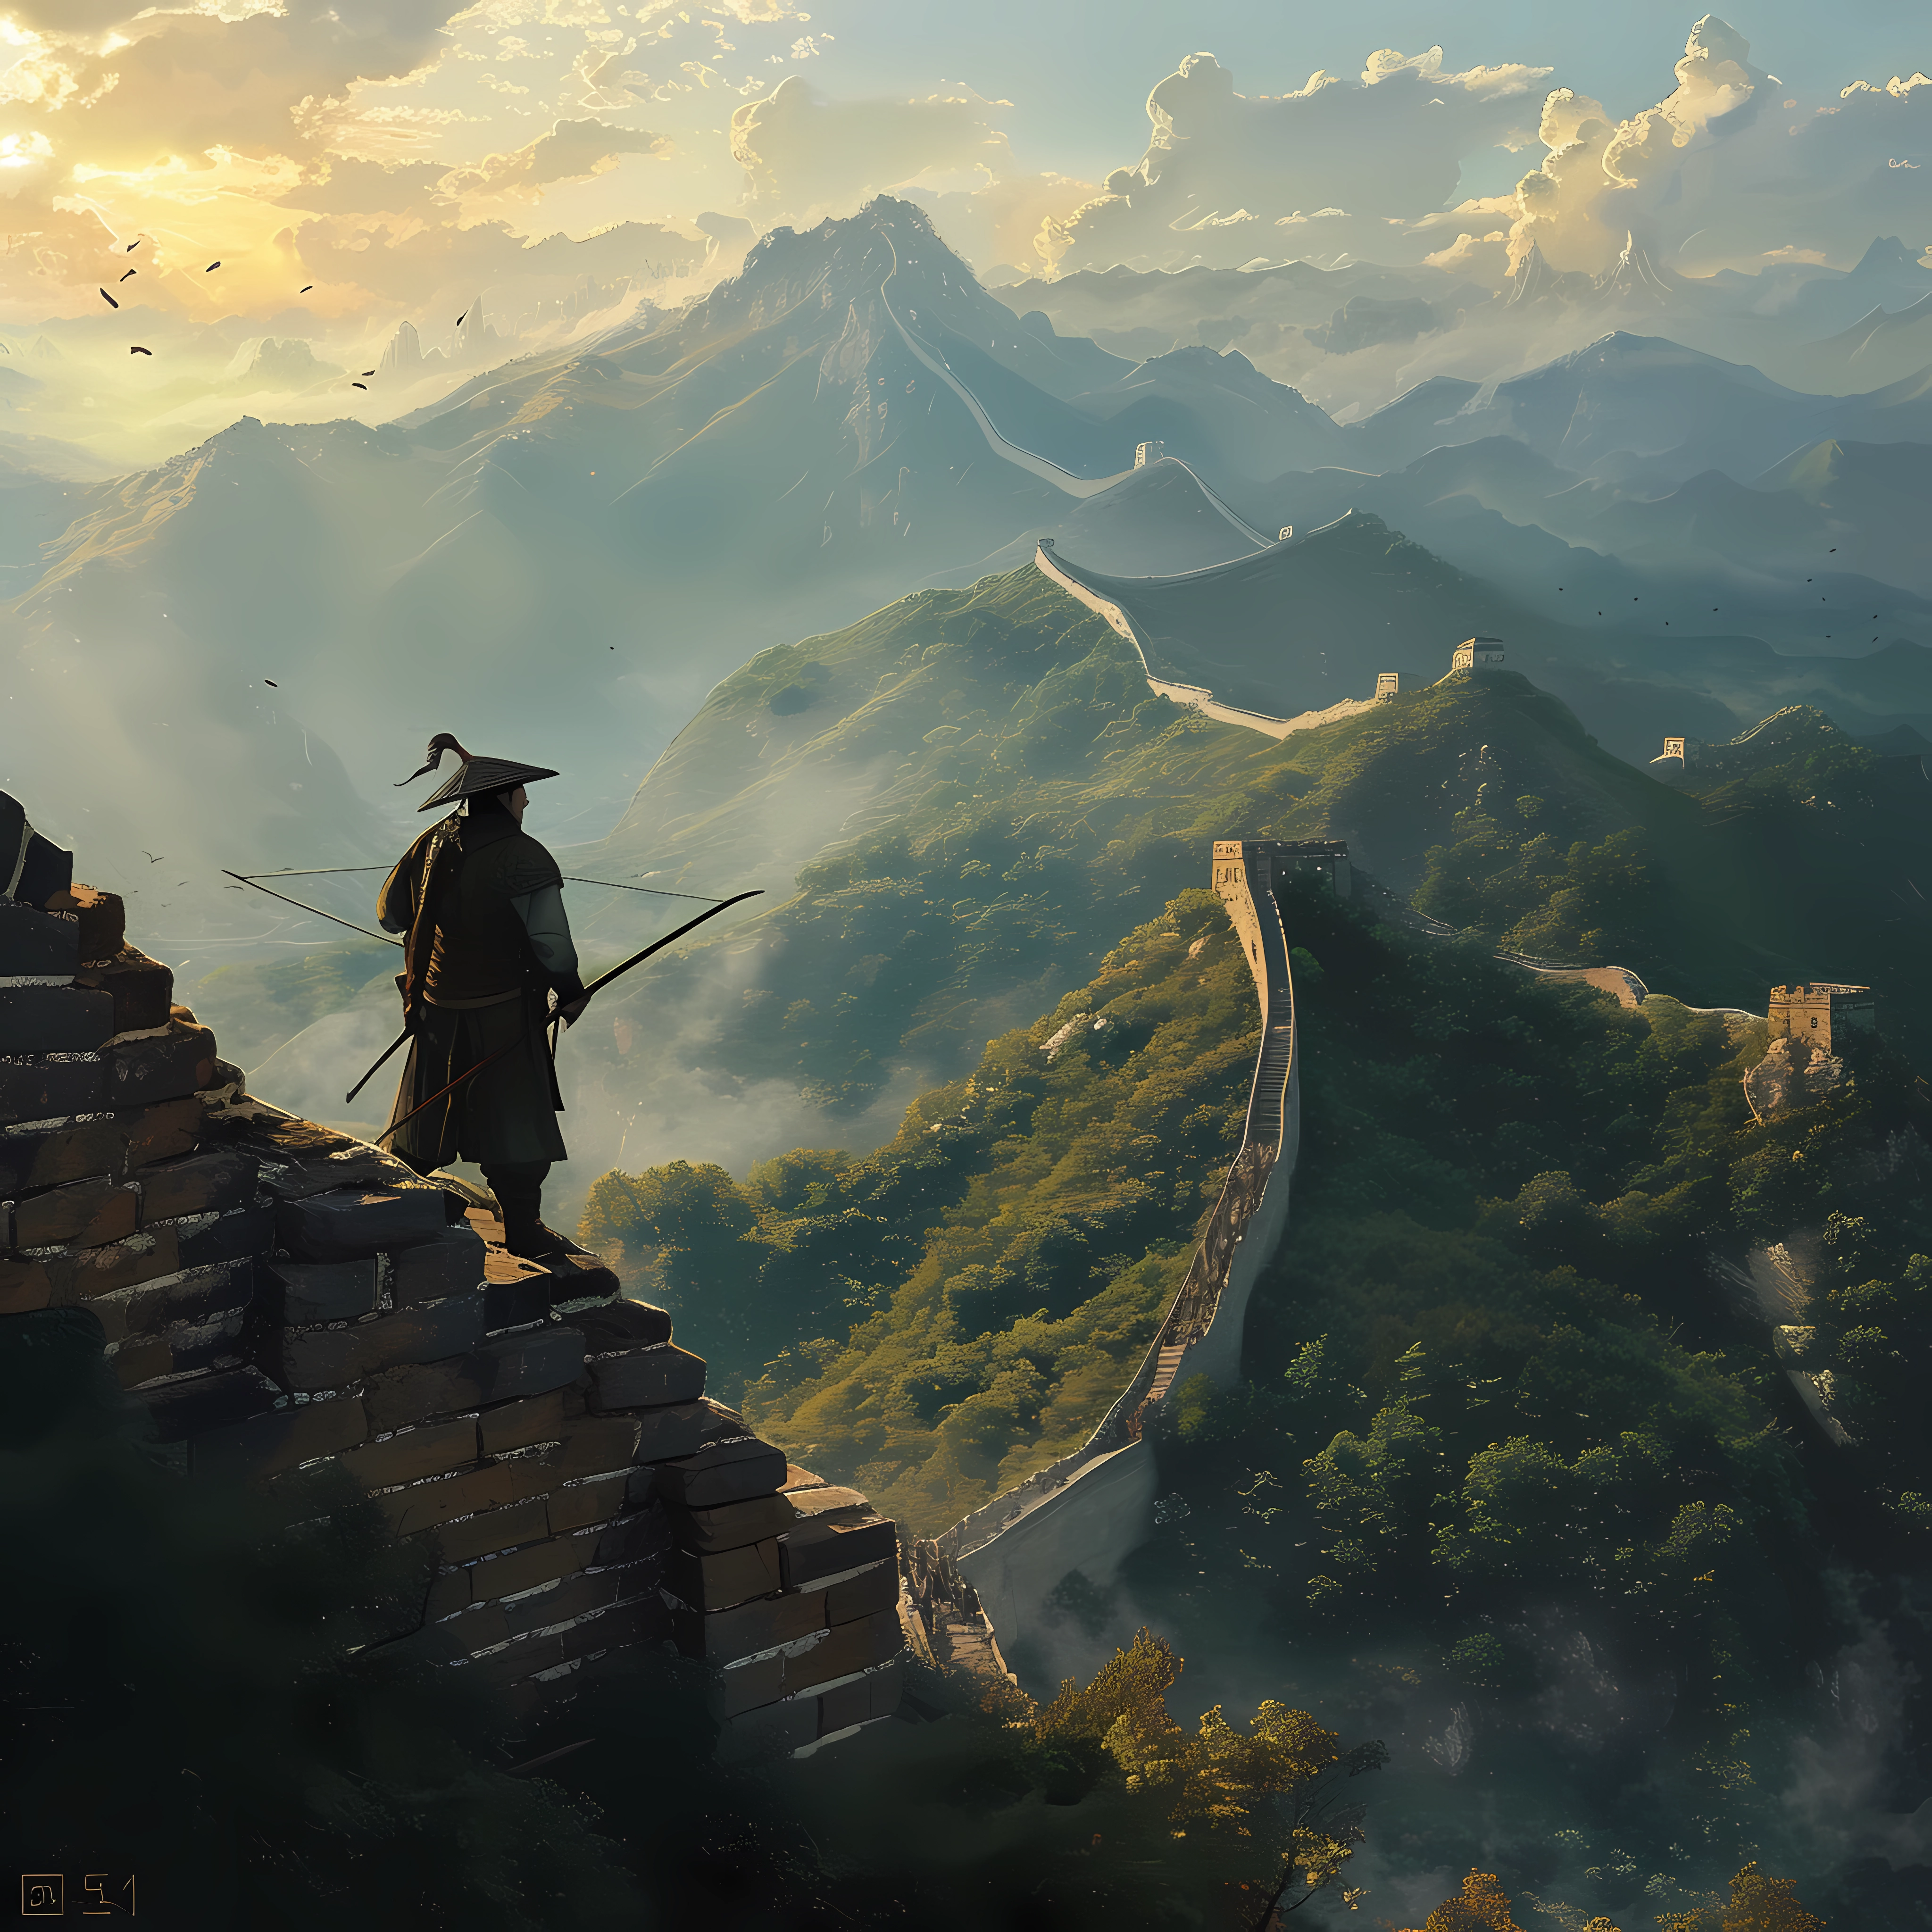 Fantasy avatar of an archer standing on the Great Wall of China with a scenic mountain backdrop, evoking a sense of history and adventure.